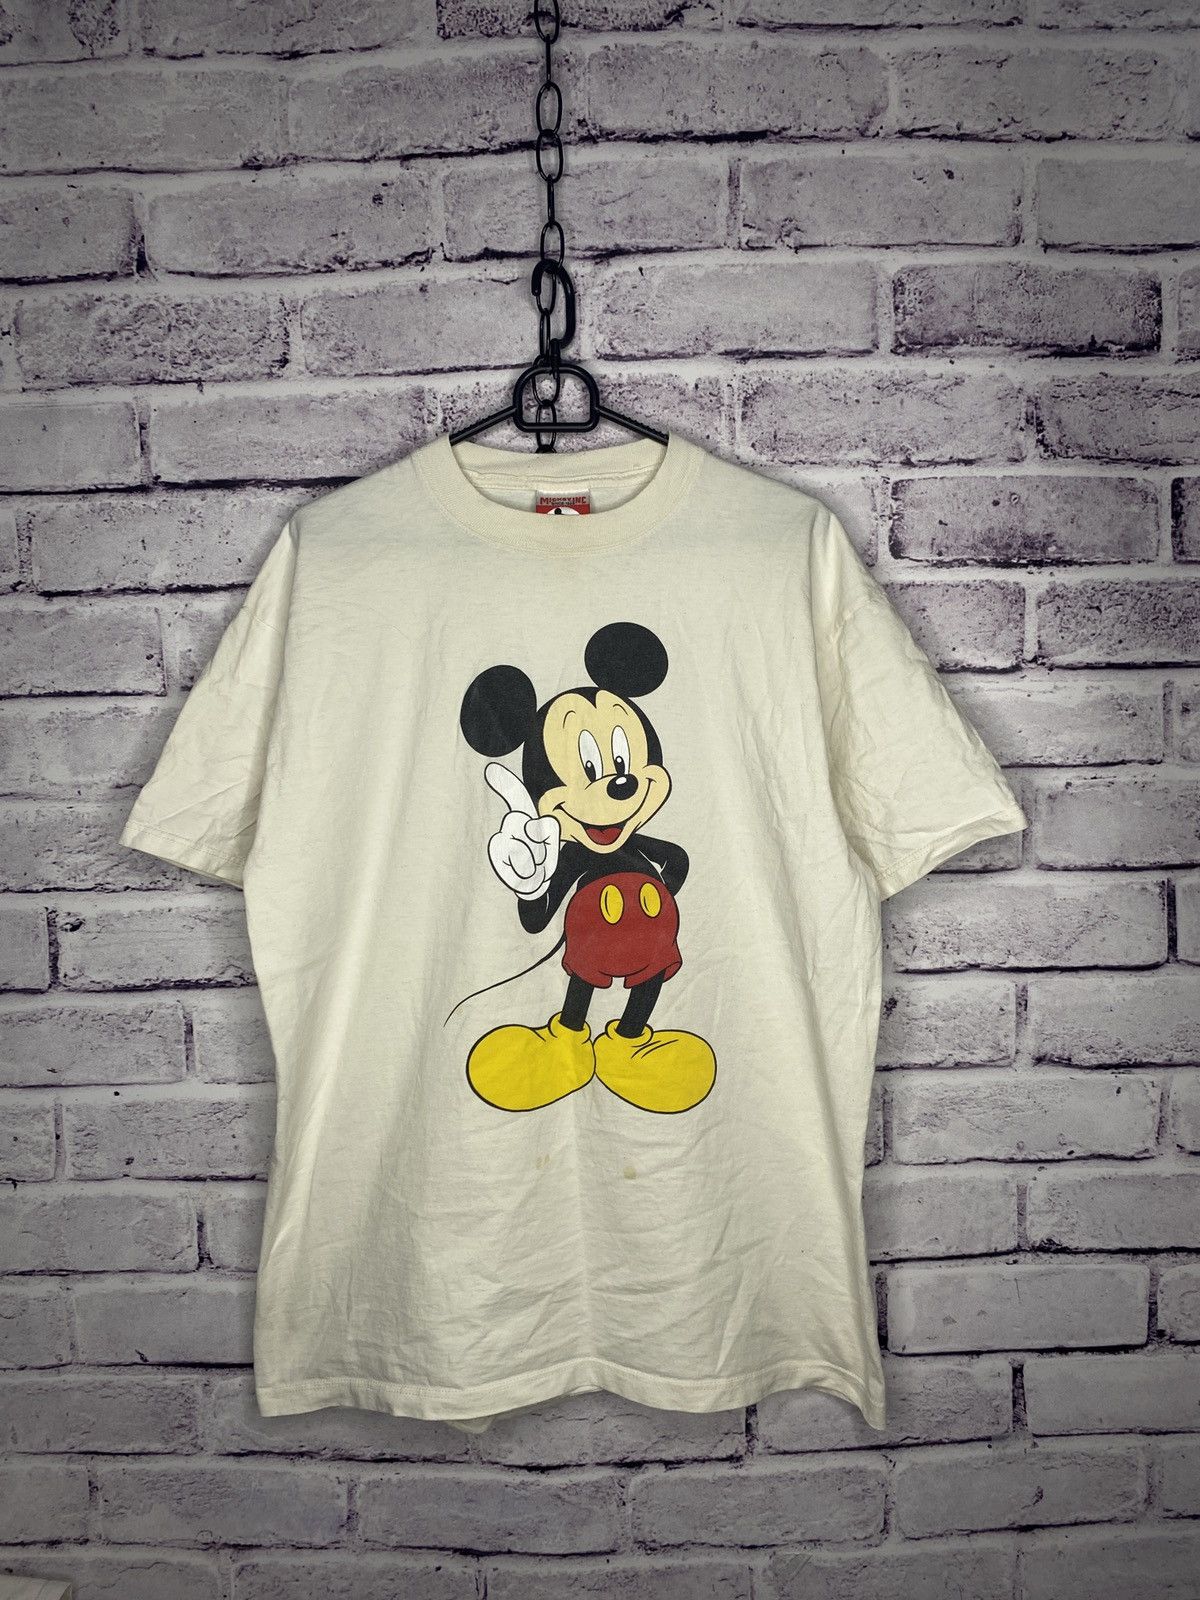 Pre-owned Cartoon Network X Disney Mens Vintage 90's Disney Micky Mouse Big Logo Tshirt Size L In White